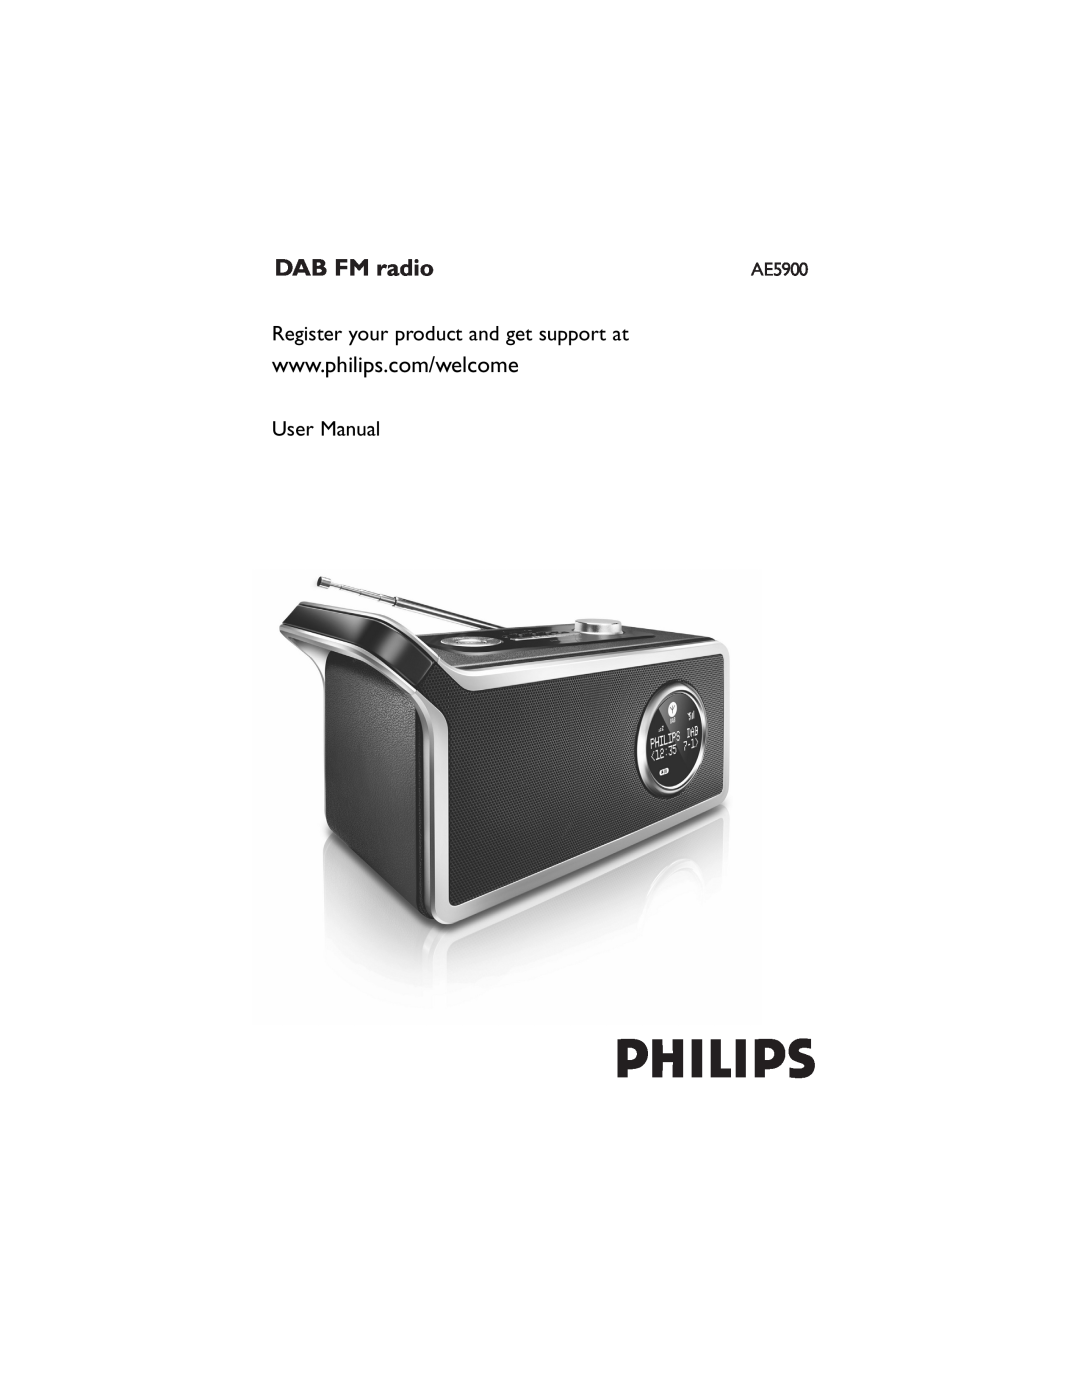 Philips AE5900 user manual DAB FM radio, Register your product and get support at 